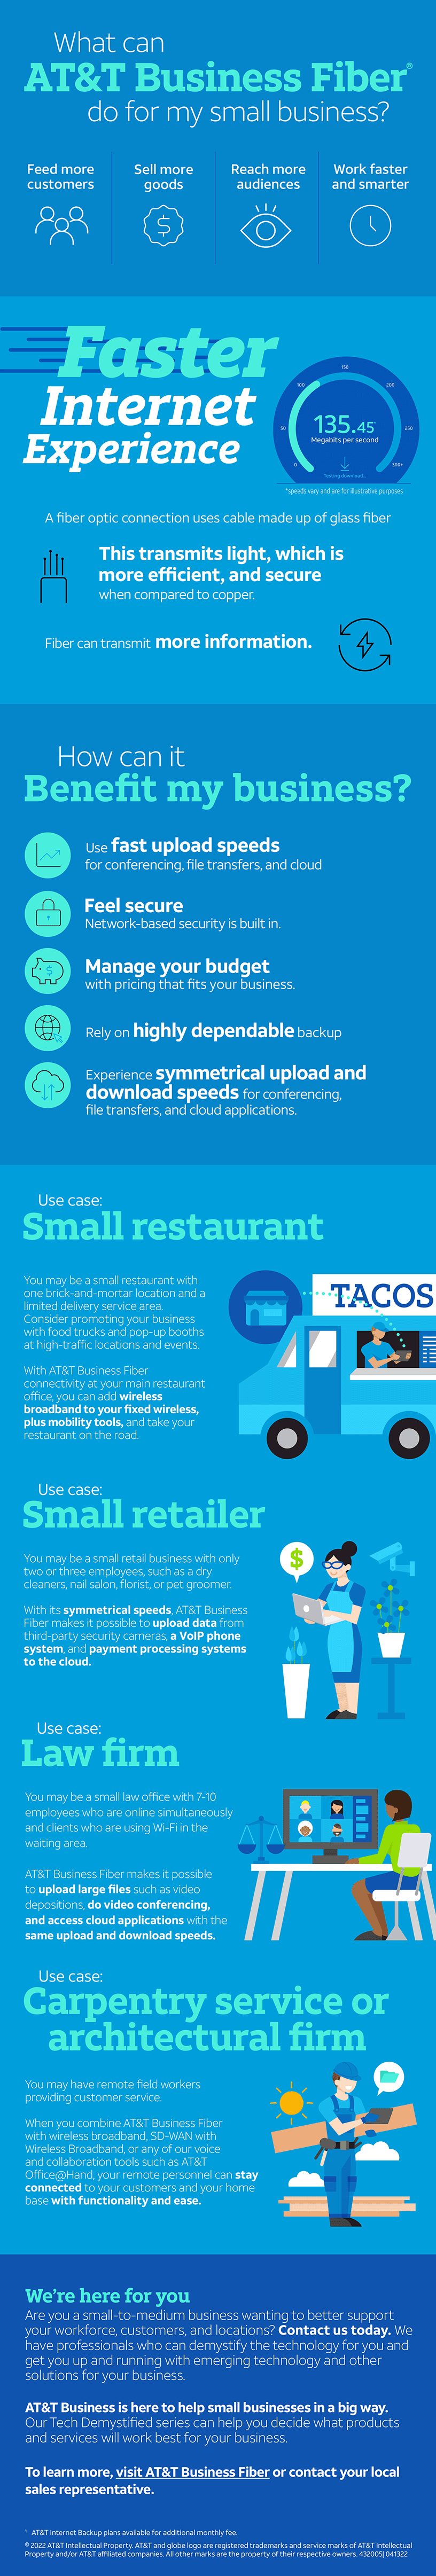 AT&T Business Fiber infographic